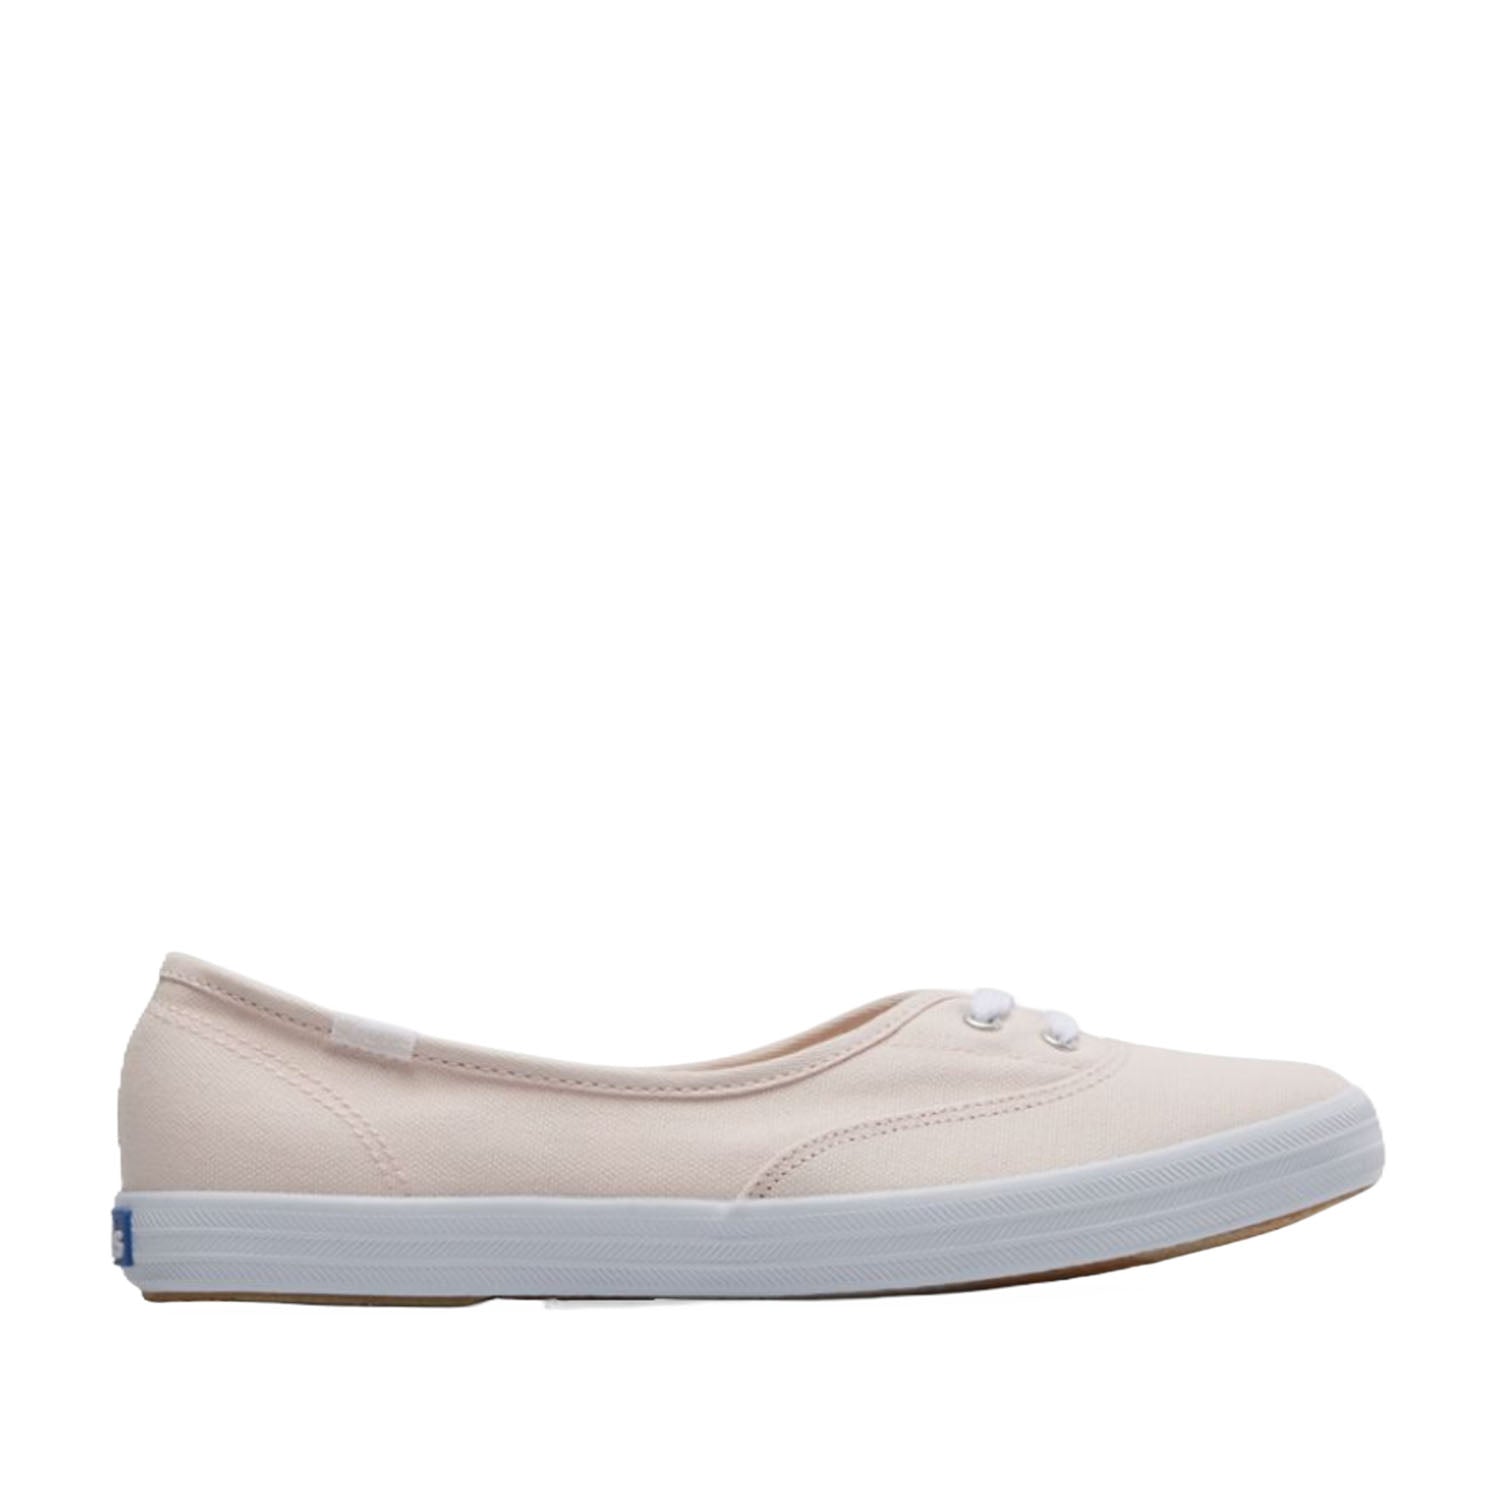 Keds Women's The Mini Canvas in Light Pink